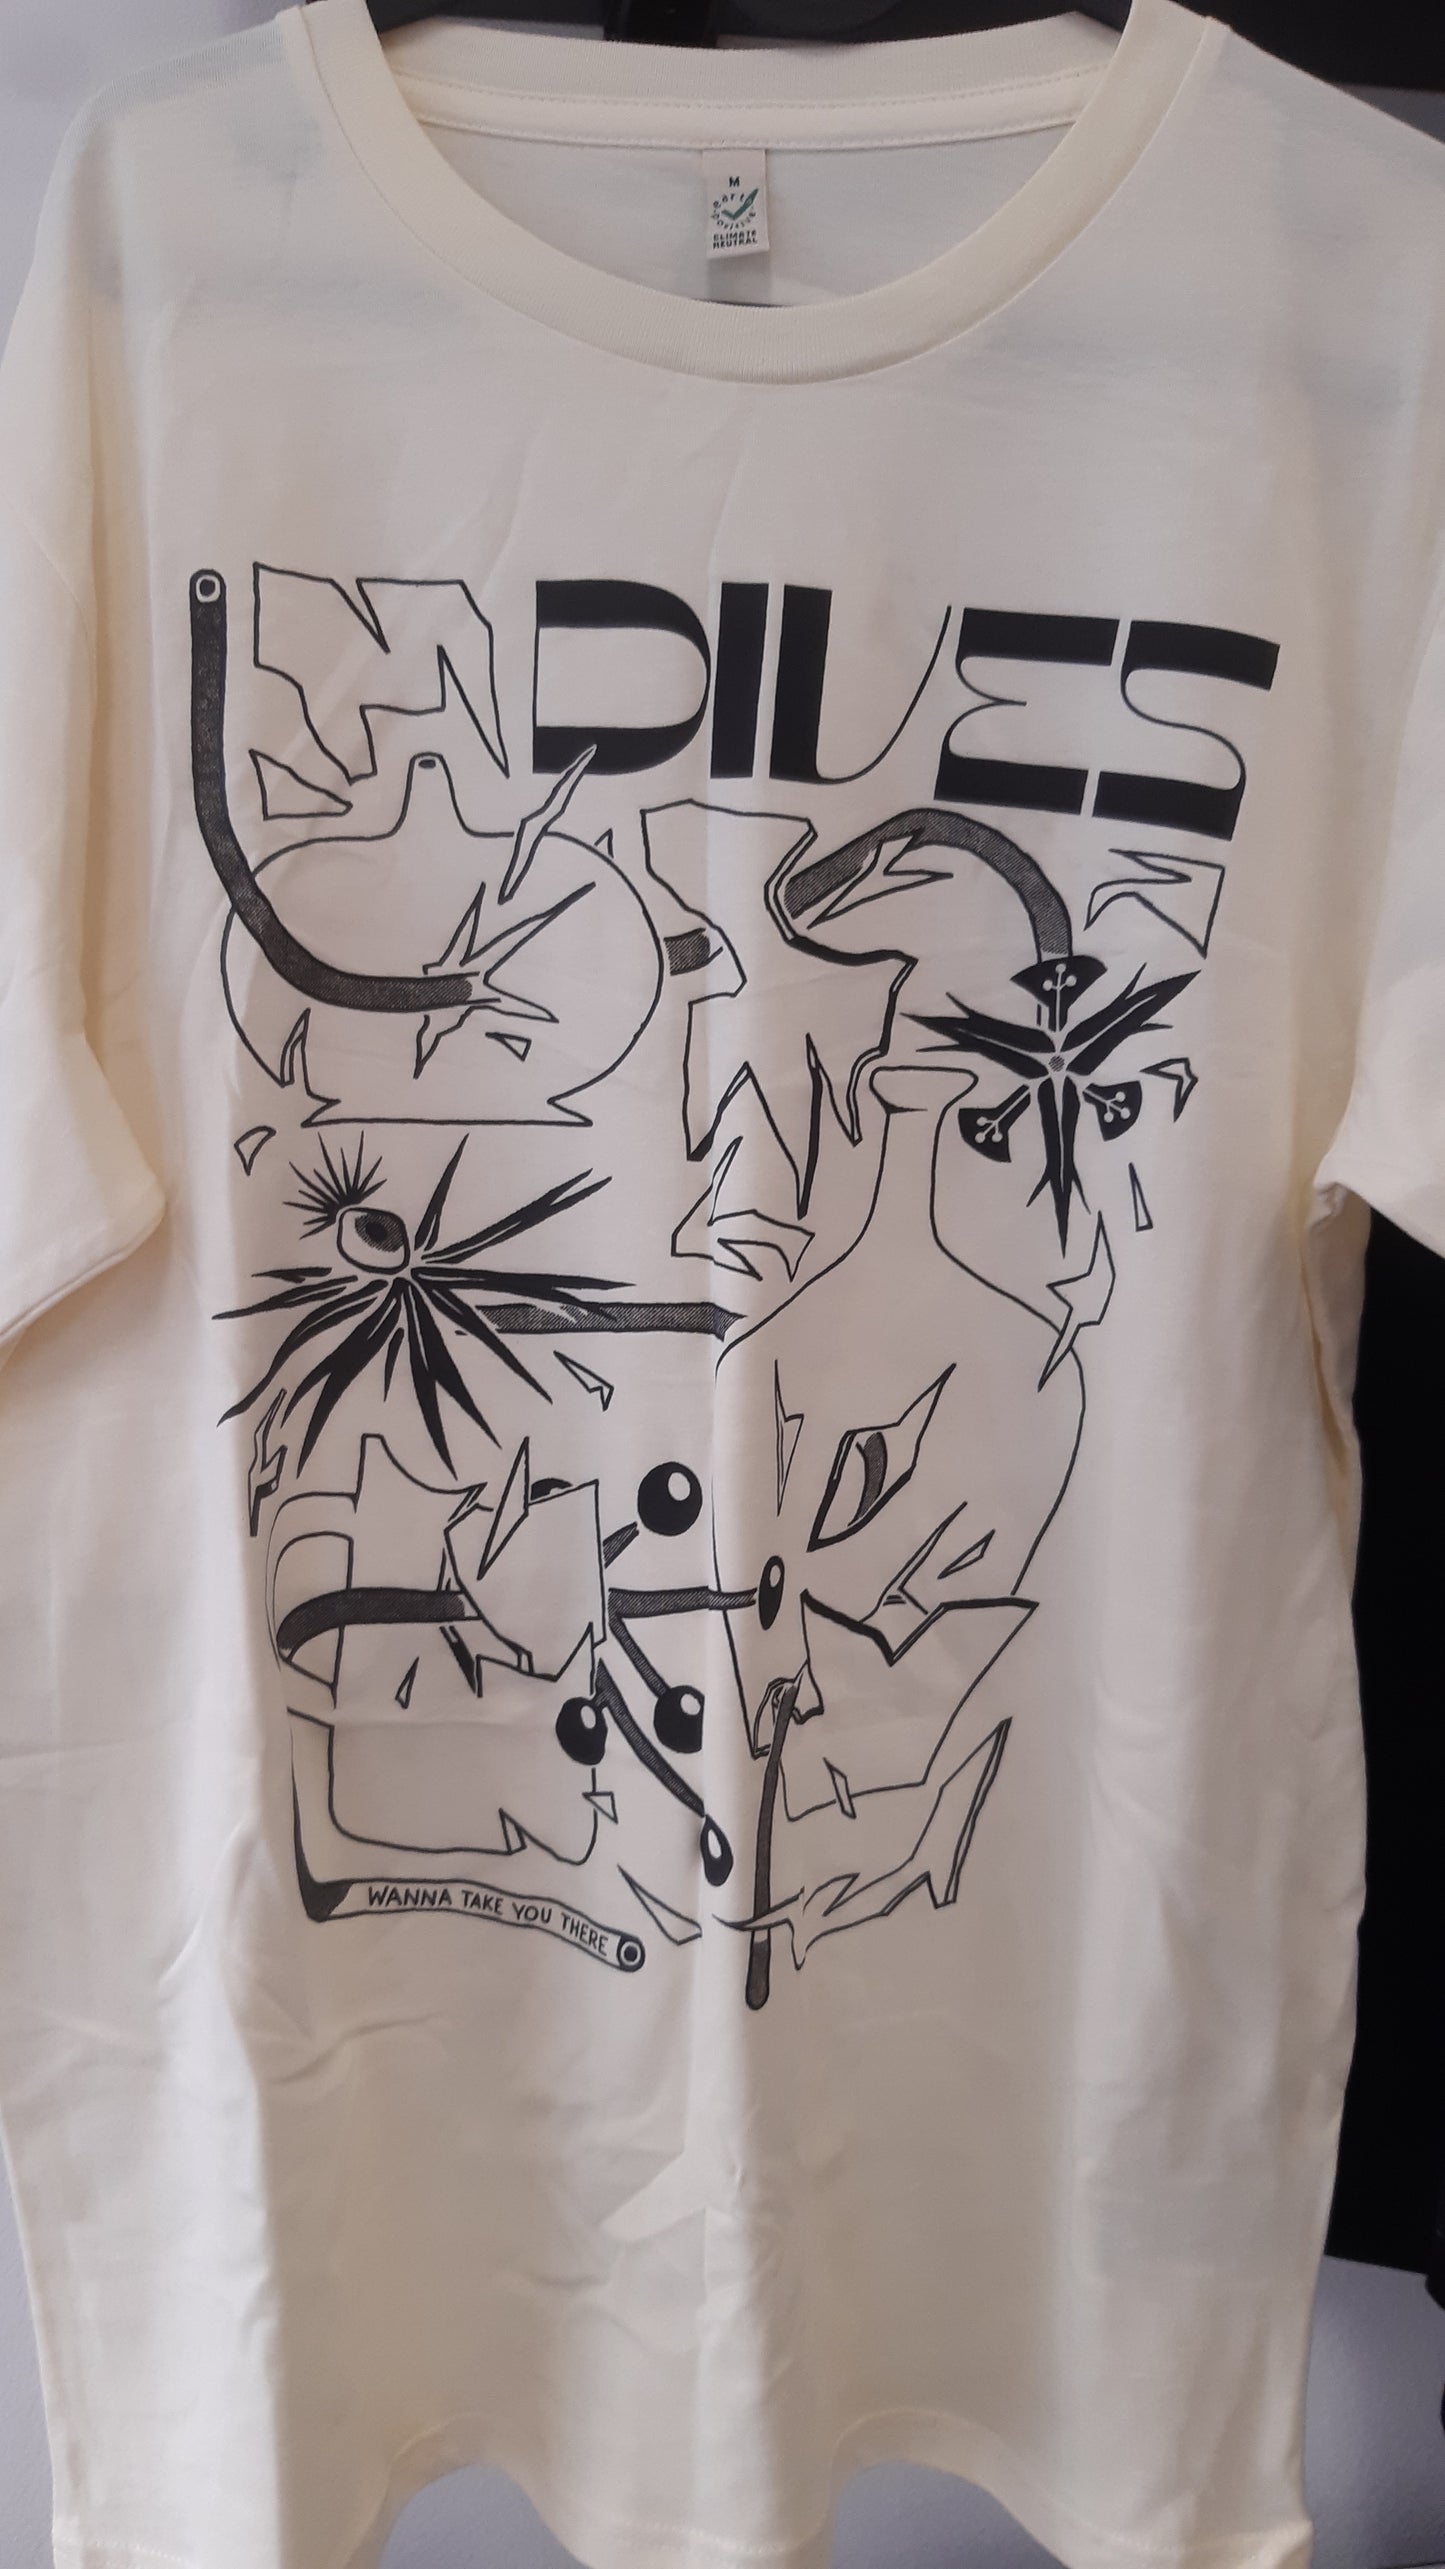 DIVES - Shirt "Wanna Take You There"